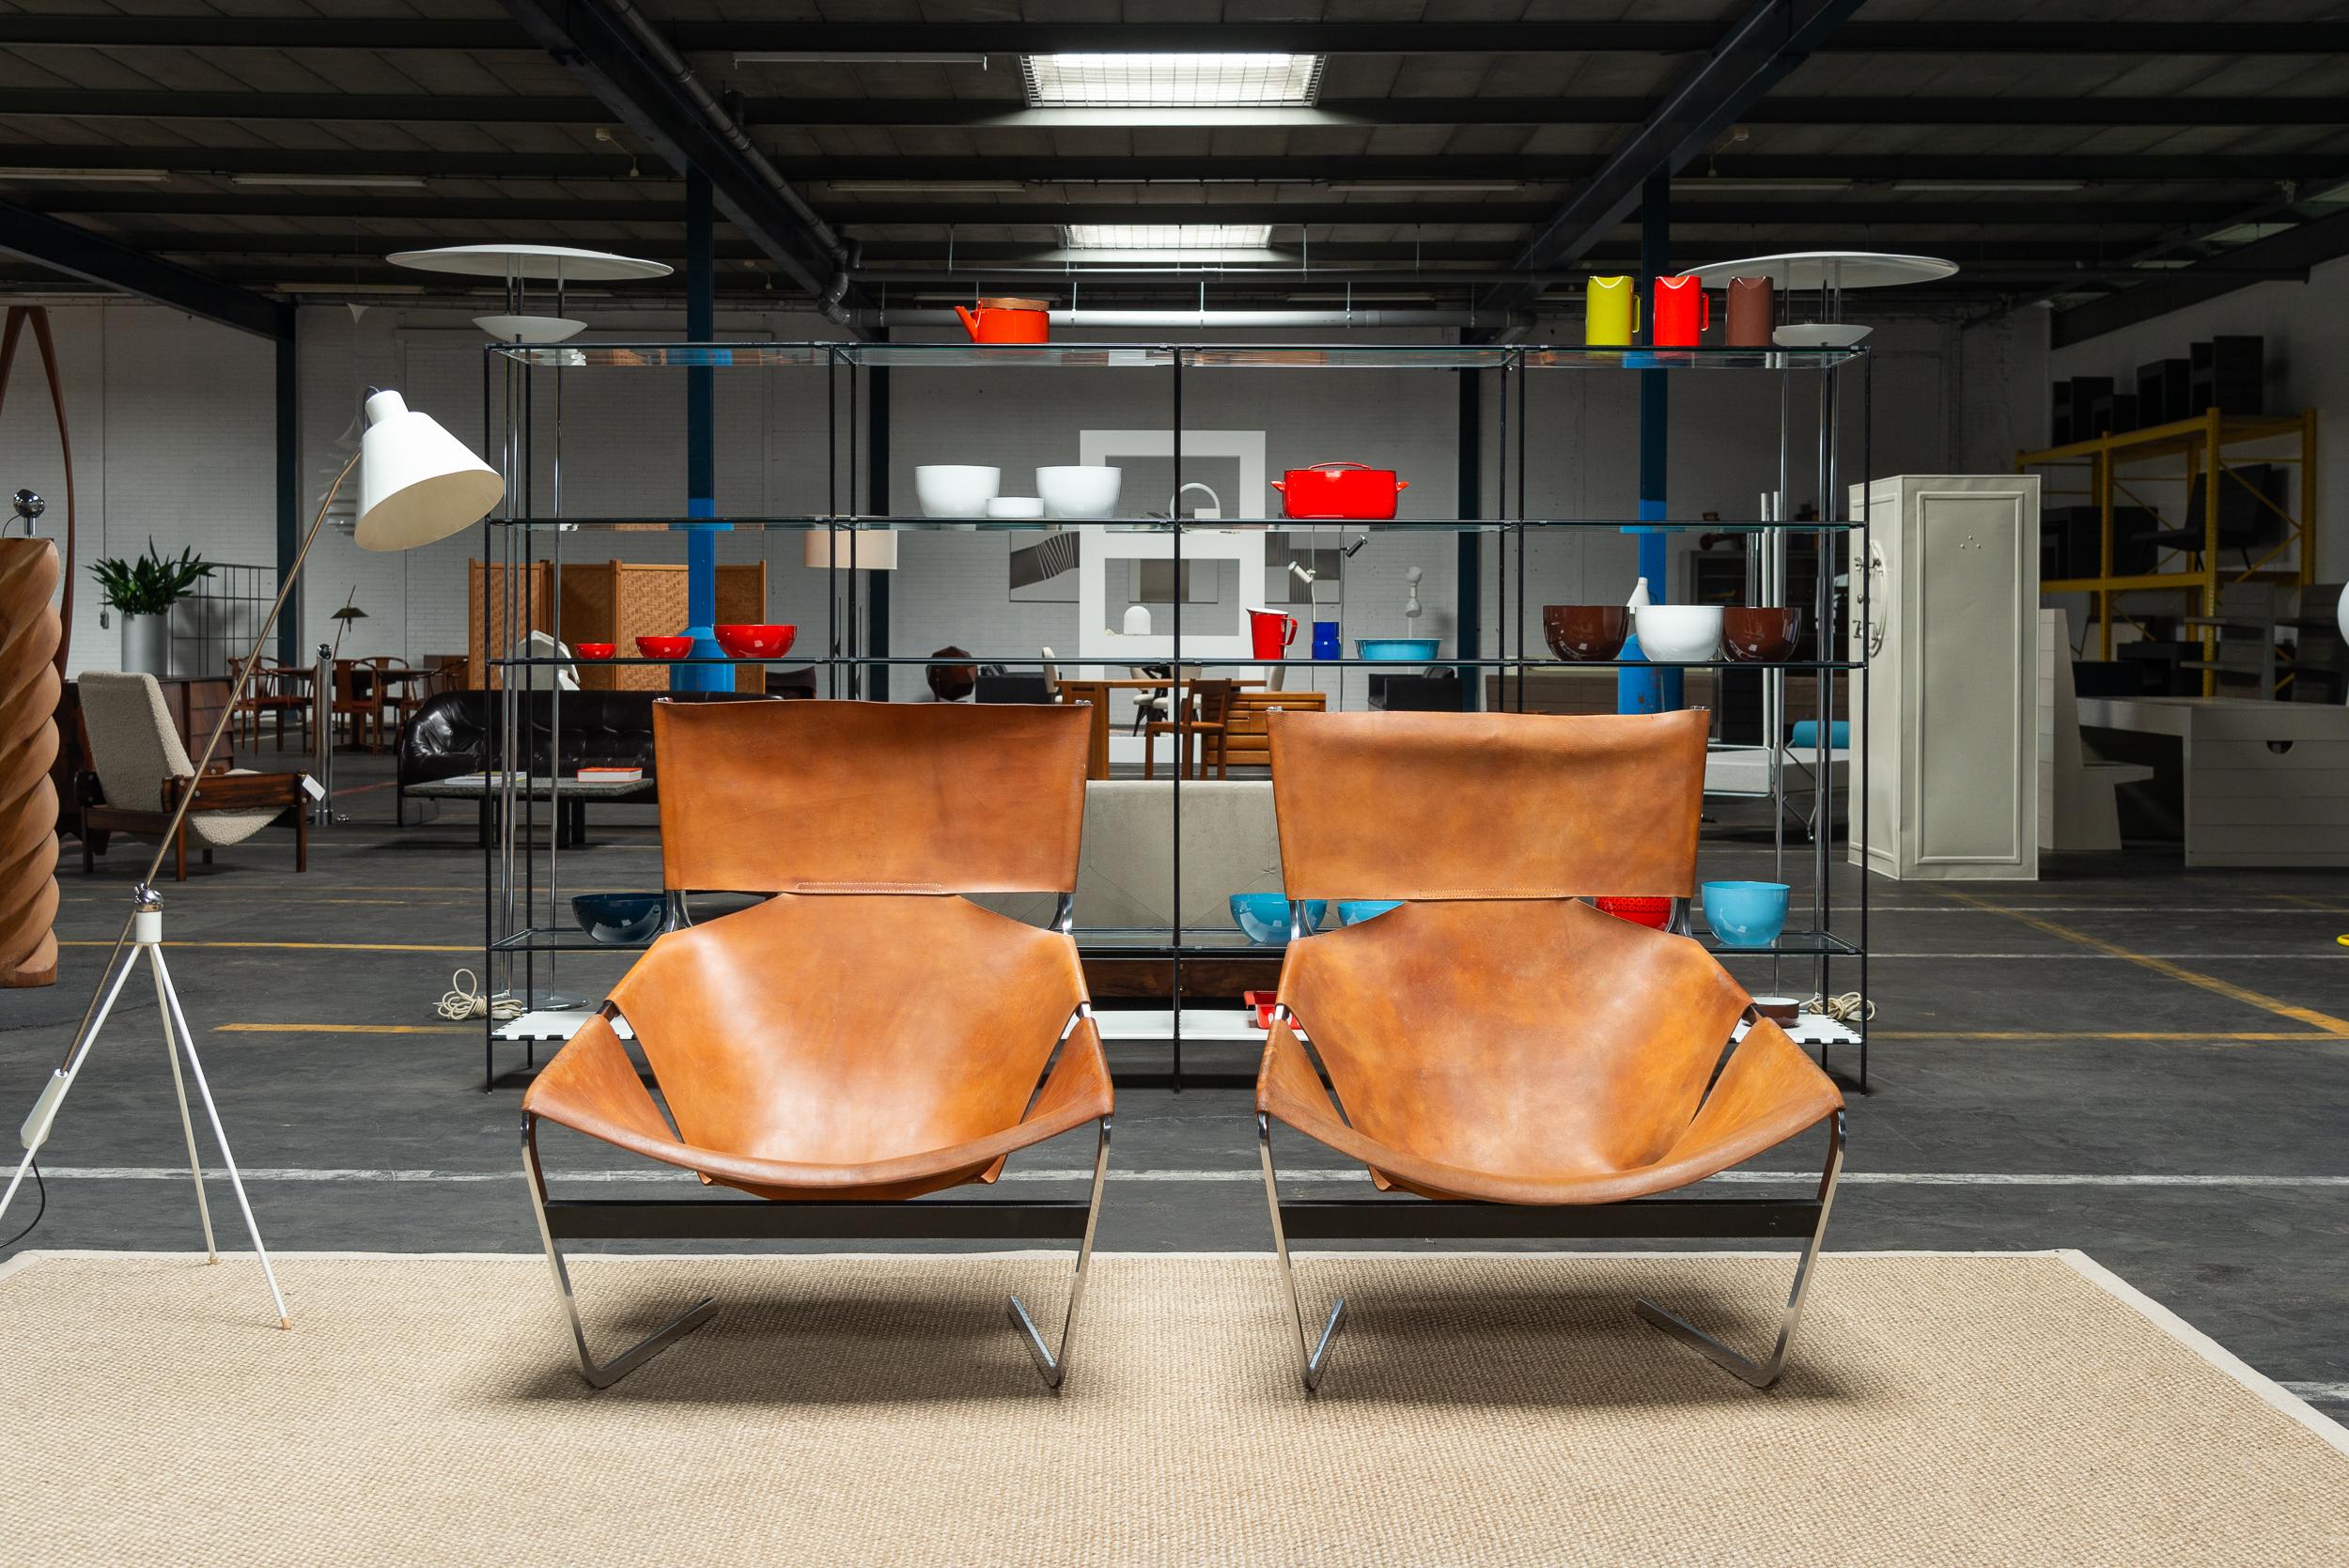 Stunning and original pair of F444 lounge chairs designed by Pierre Paulin and manufactured by Artifort in 1963. Back in the 1960s, when this chair was born, designers were all about trying new concepts. The F444 lounge chair is a great example of